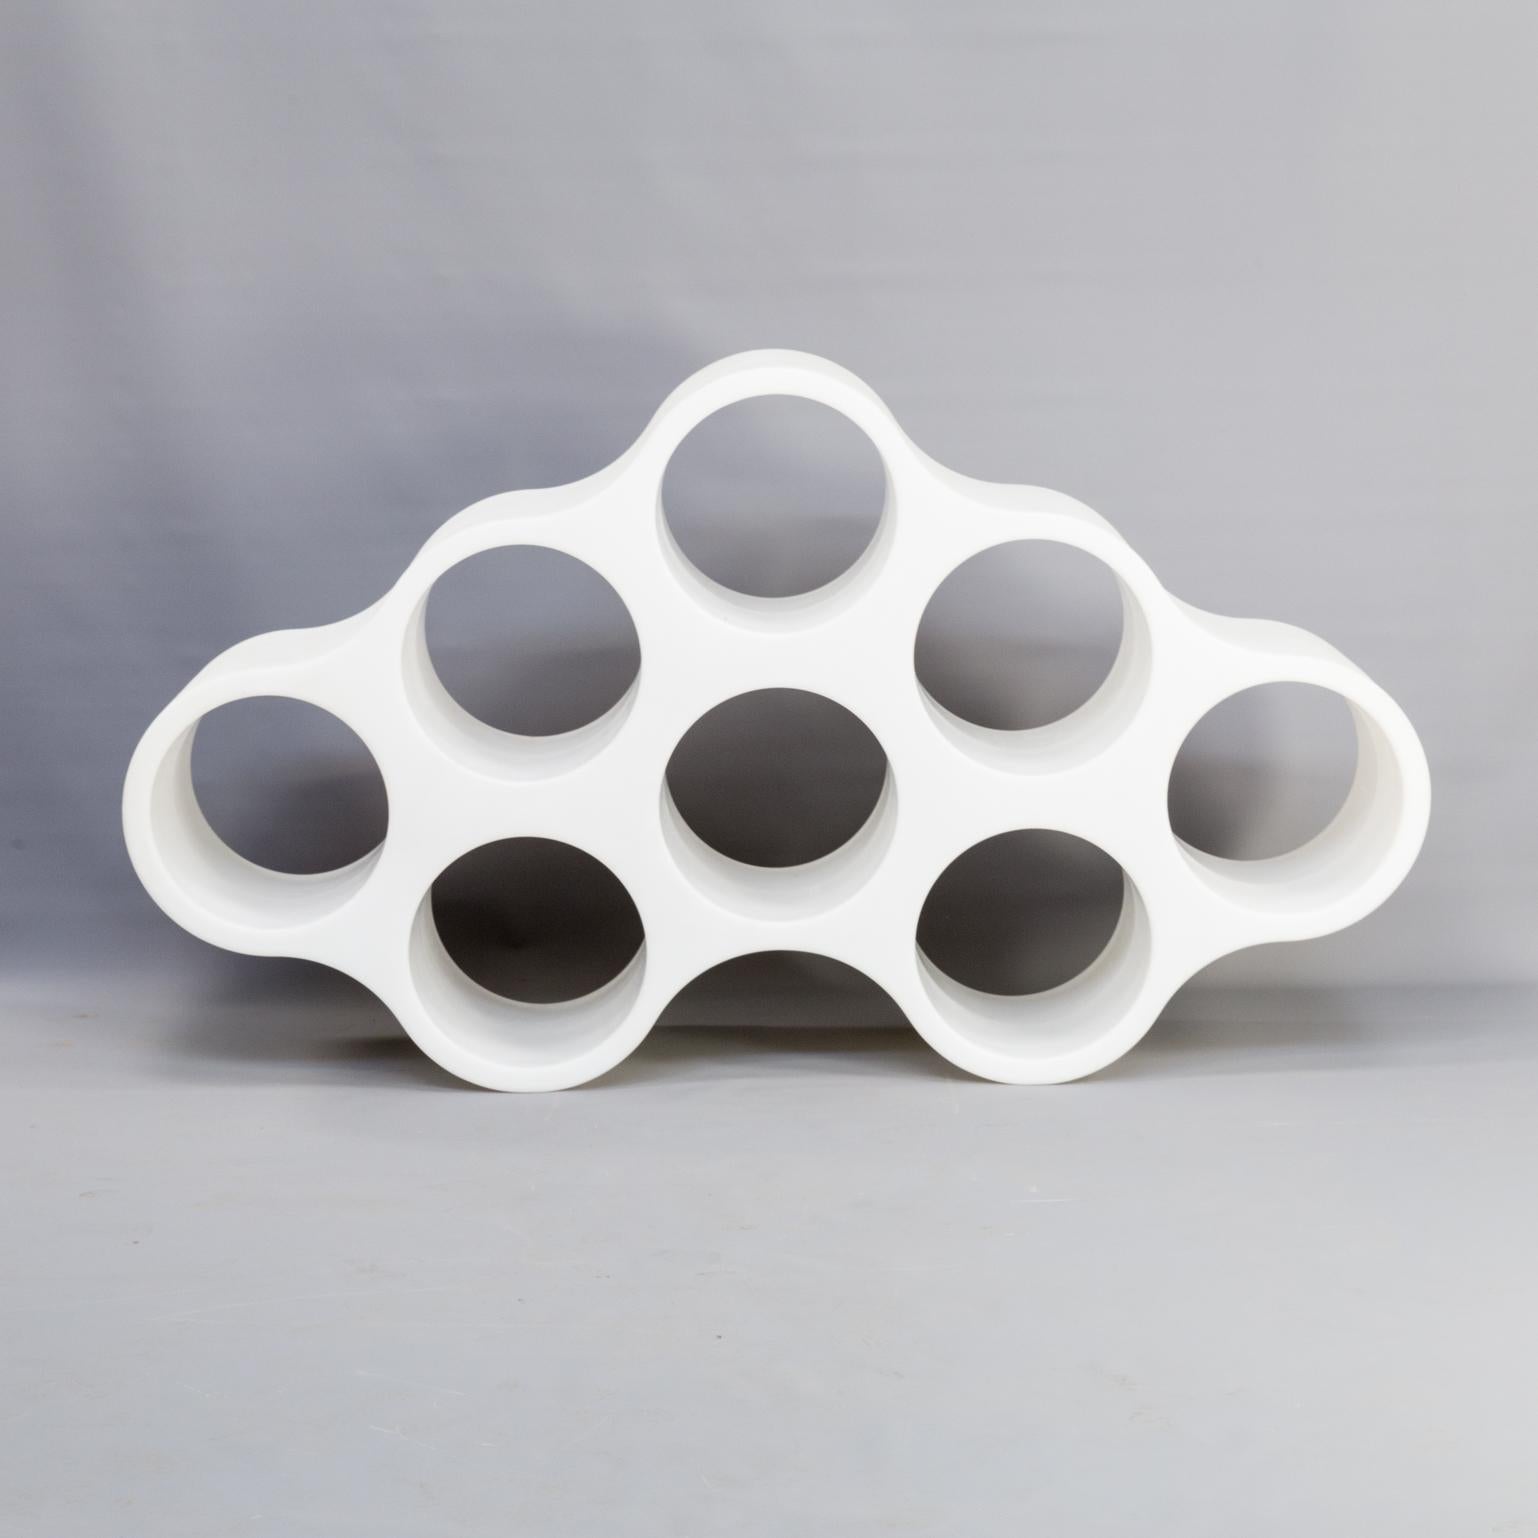 Ronan & Erwan Bouroullec ‘cloud’ wall unit for Cappellini. Made with rotational moulding technology, in white polyethylene 'cloud' is a two-sided bookshelf with hollow compartments. Cloud is an extravagant furnishing element with a pop flair and an